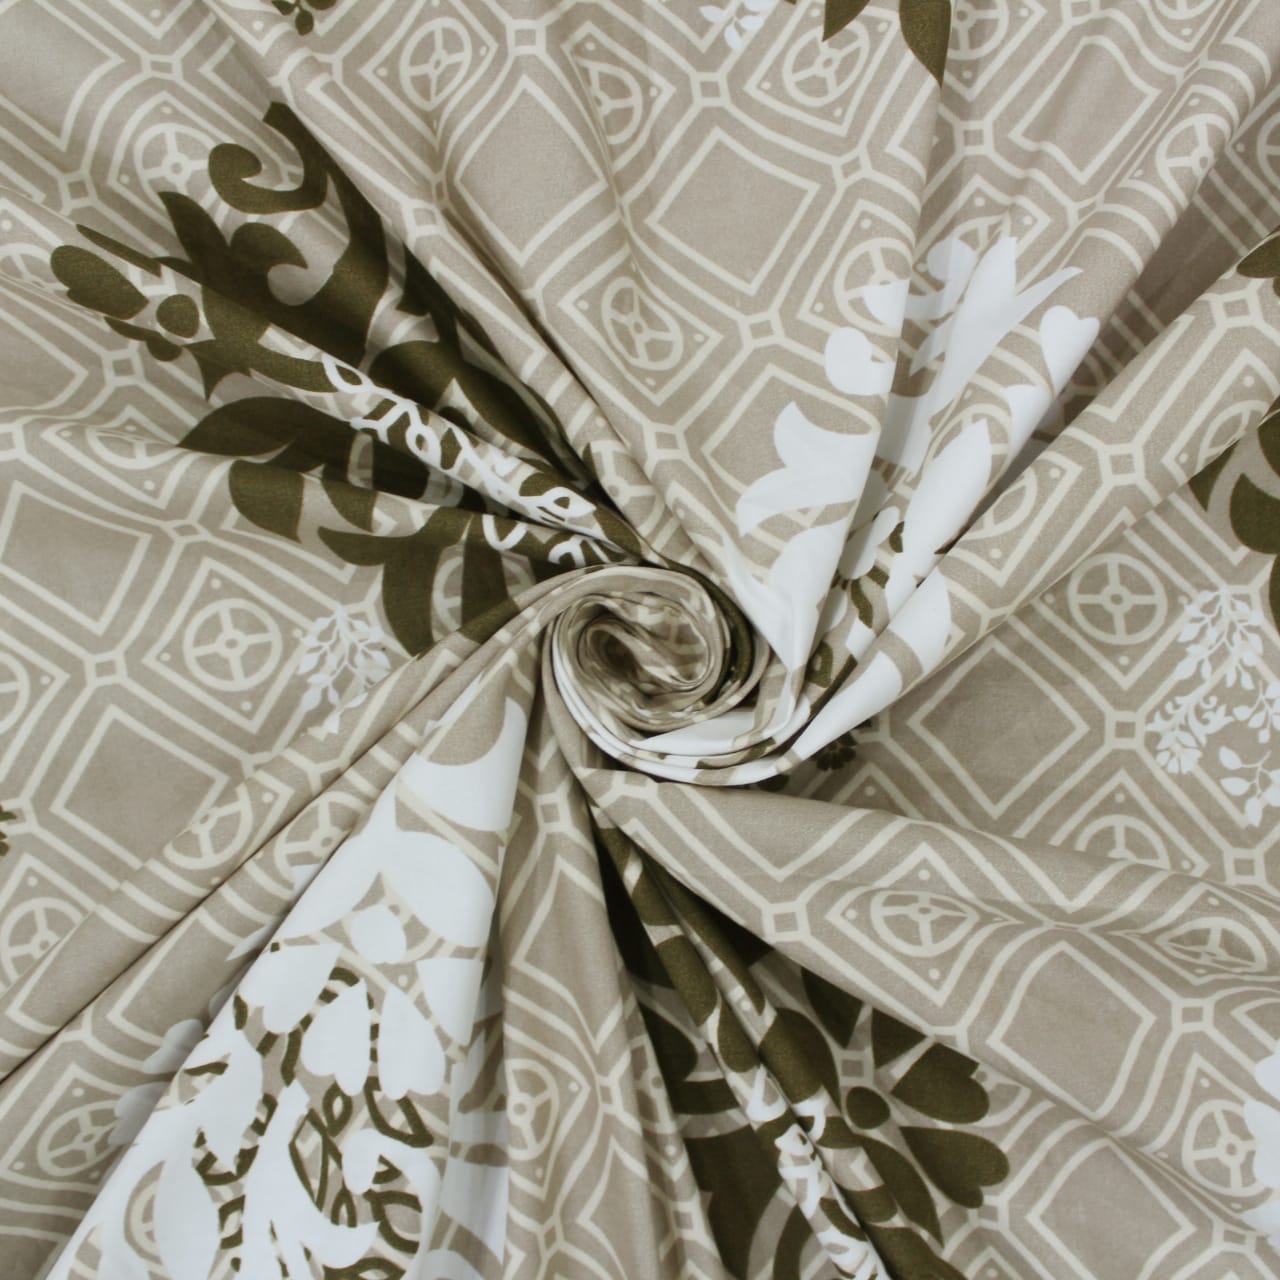 Cotton Floral Print 210 TC King Size Fitted Bedsheet In Khaki